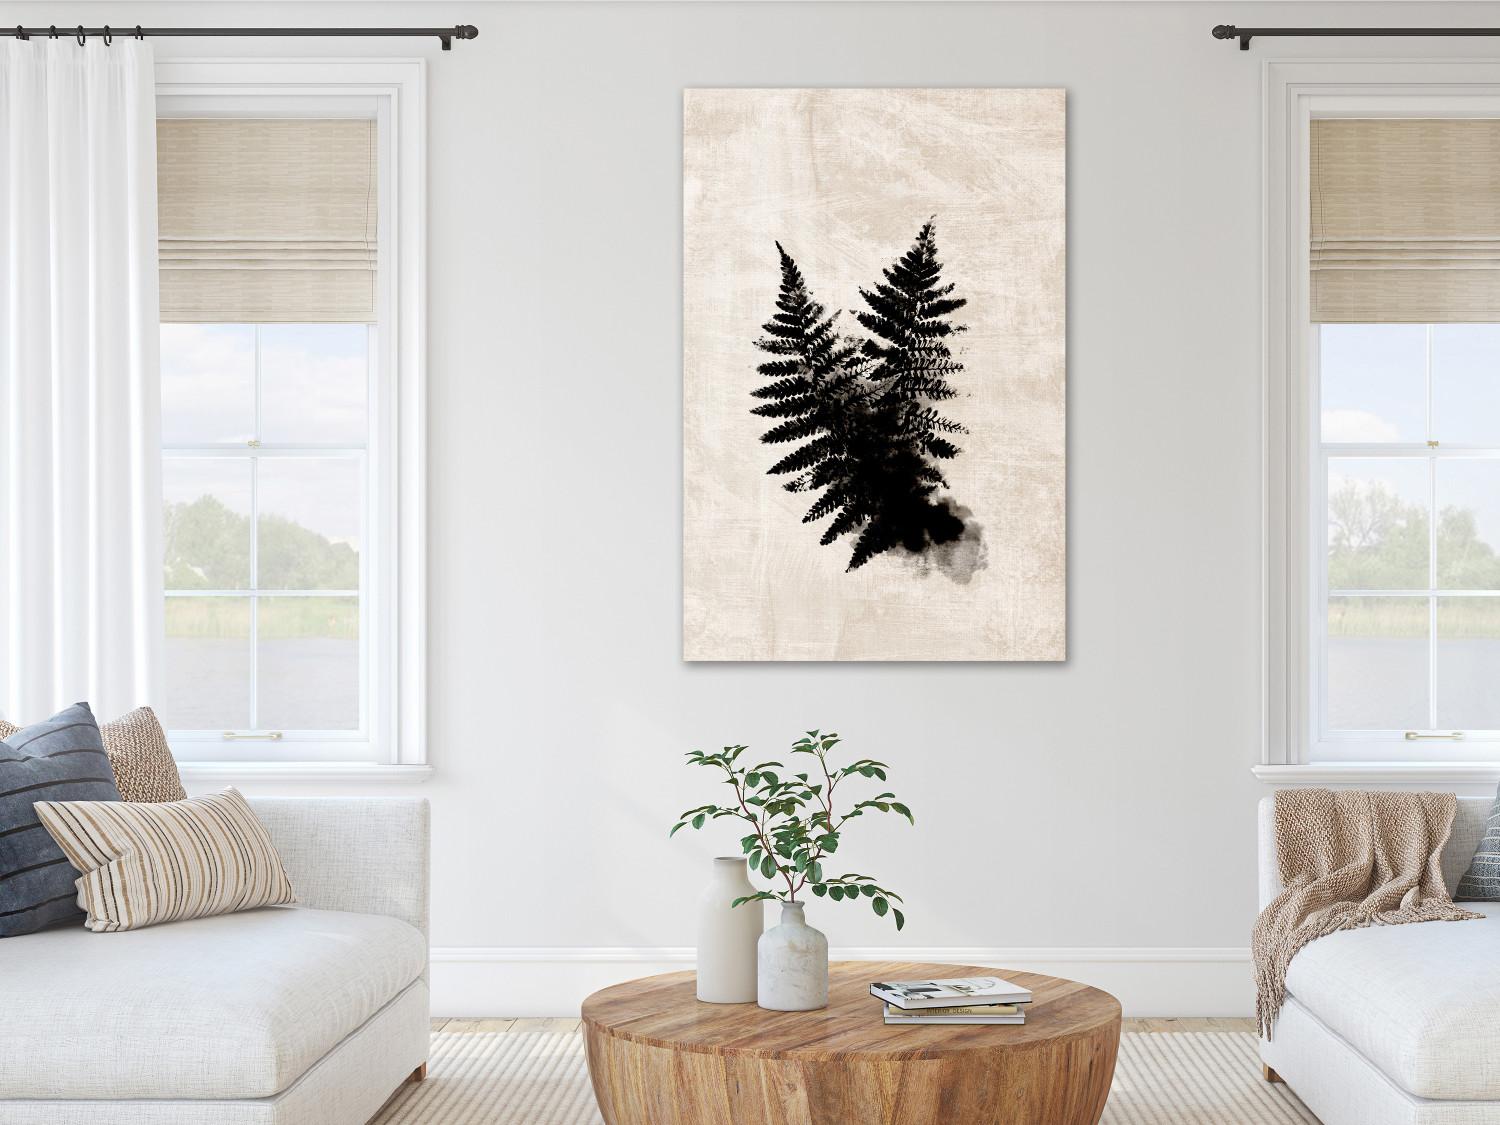 Canvas Black fern - two leaves in black on a bright, shabby background